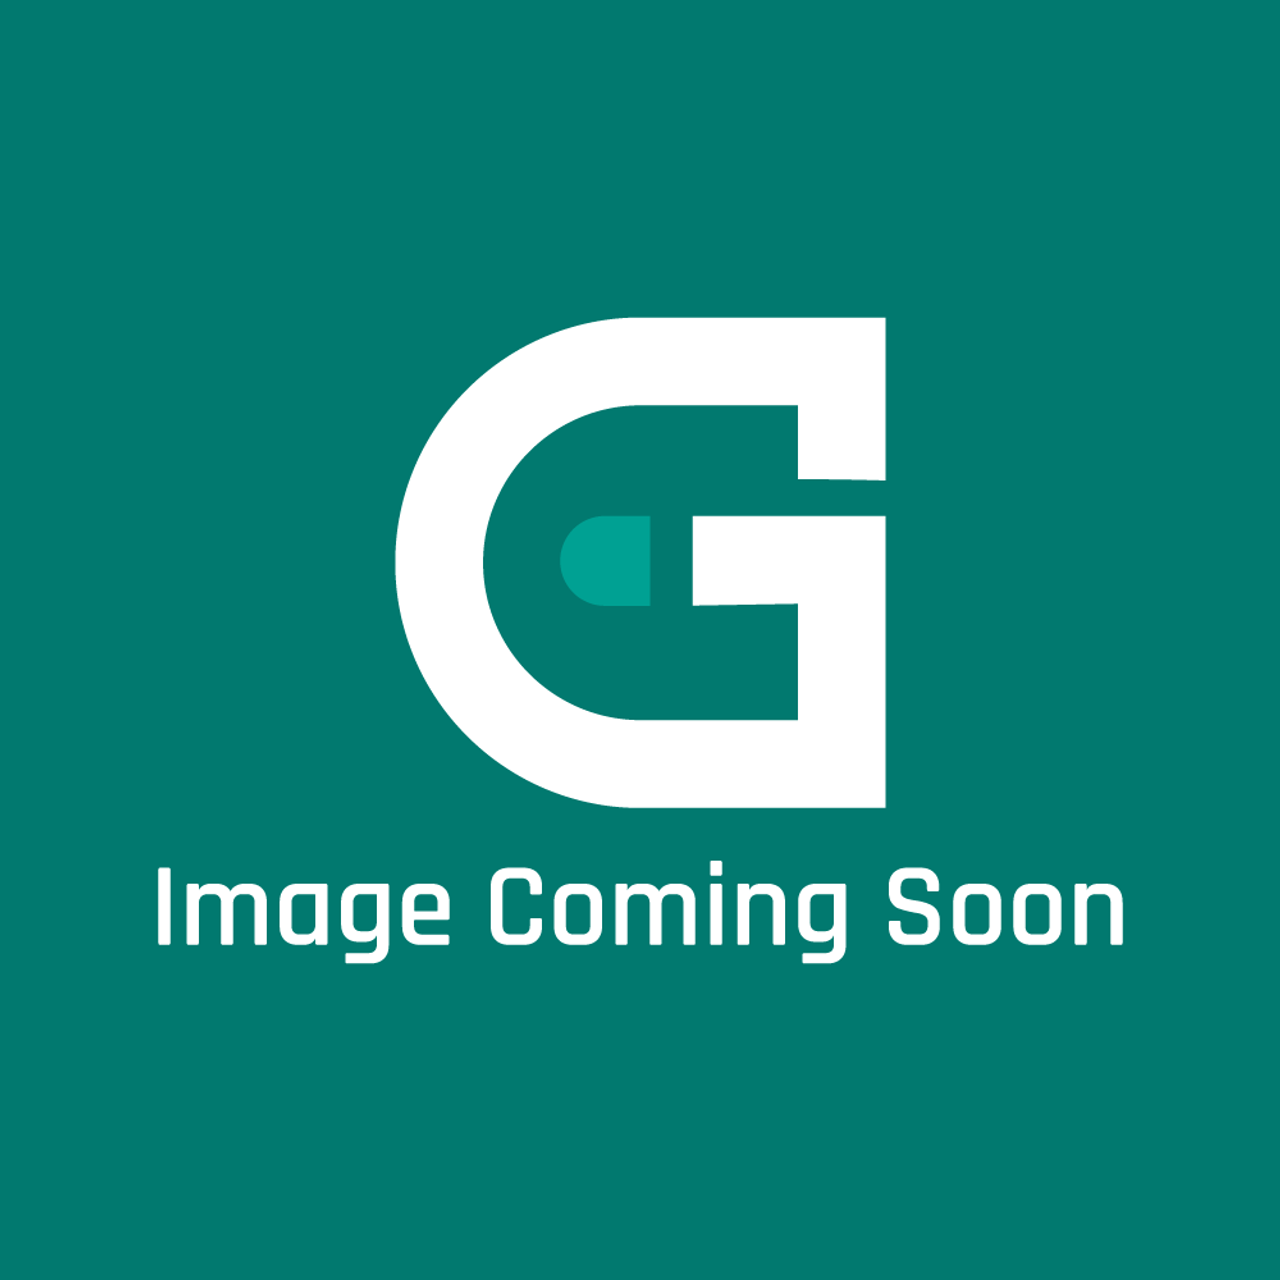 GE Appliances WR17X30108 - Ice Funnel Black Slate - Image Coming Soon!